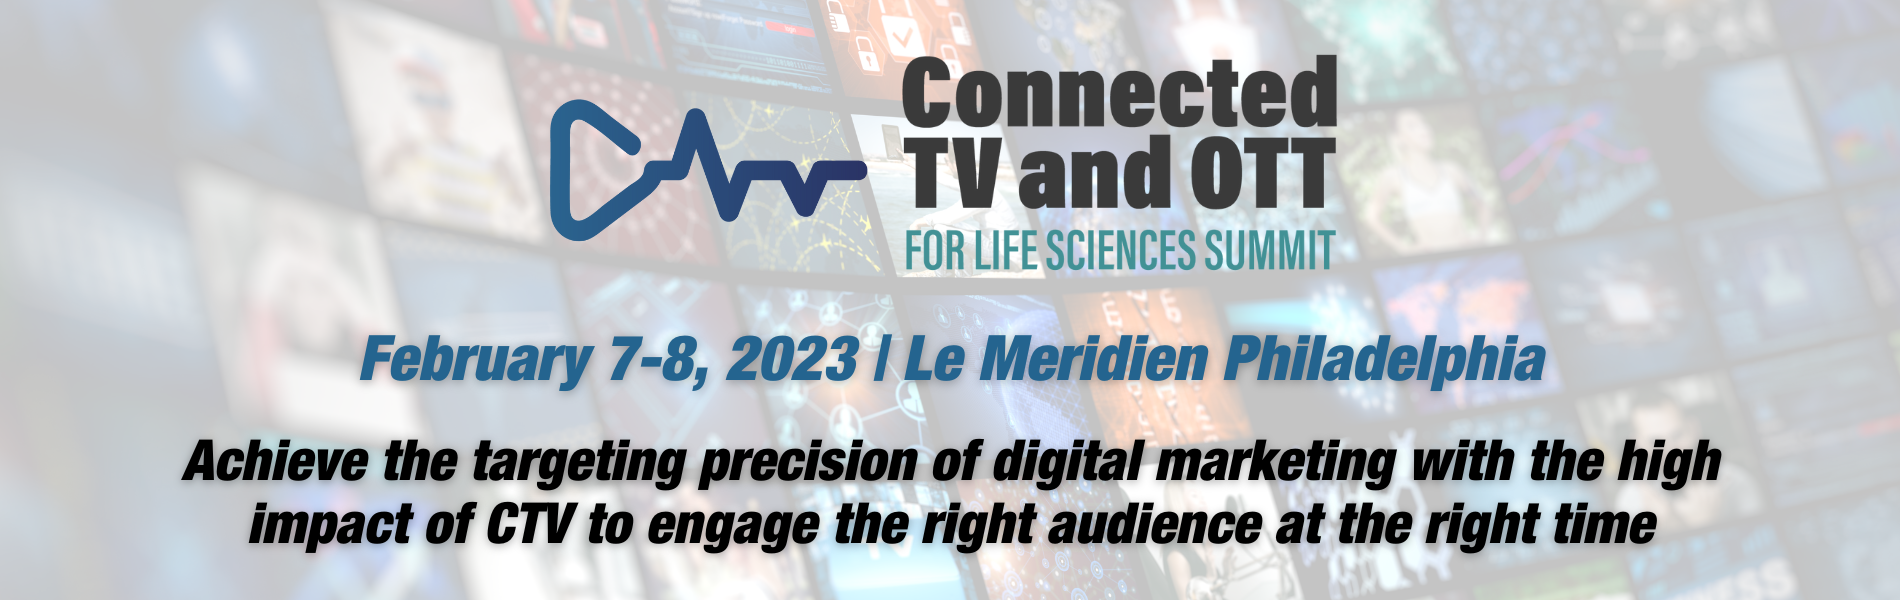 Banner for Connected TV and OTT February 7-8, 2023 Le Meriden Philadelphia, Tagline, Achieve the targeting precision of digital marketing with the high impact of CTV to engage the right audience at the right time